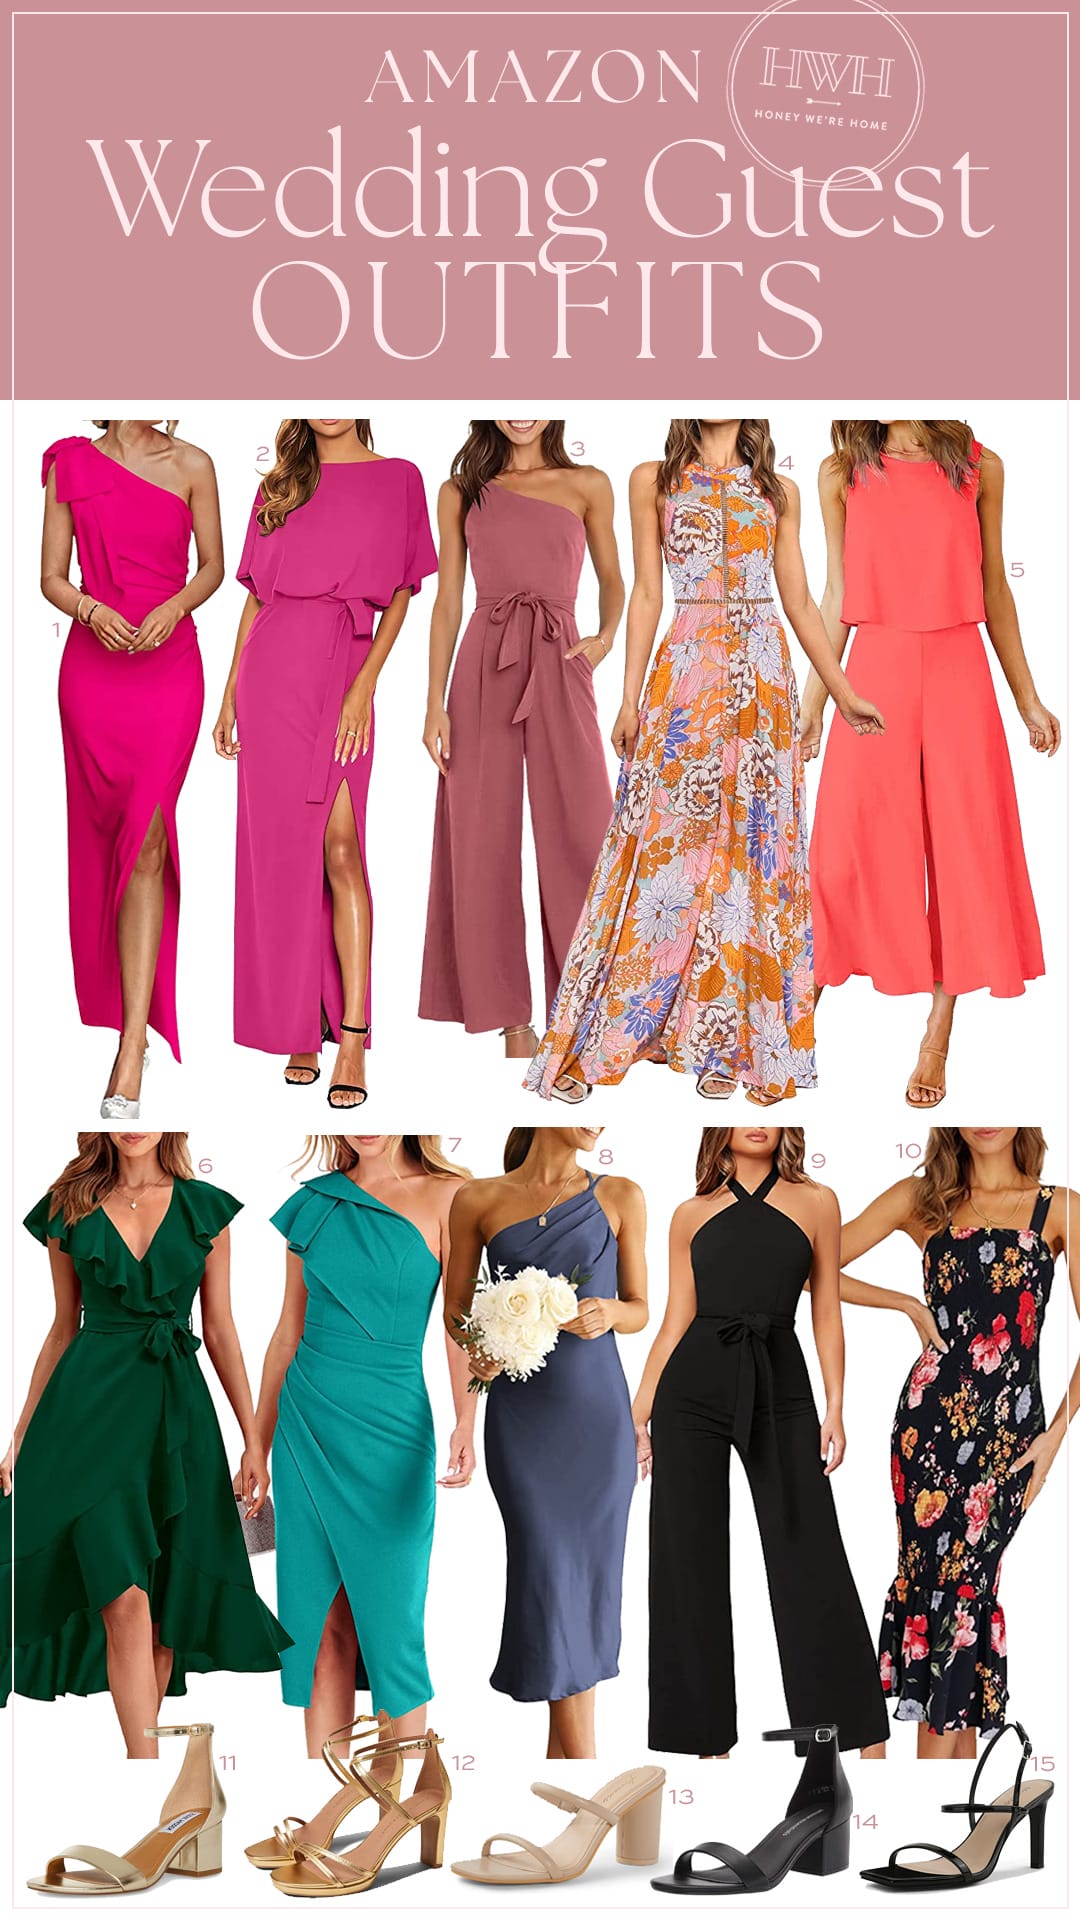 Stunning & Affordable Wedding Guest Outfits • Honey We're Home